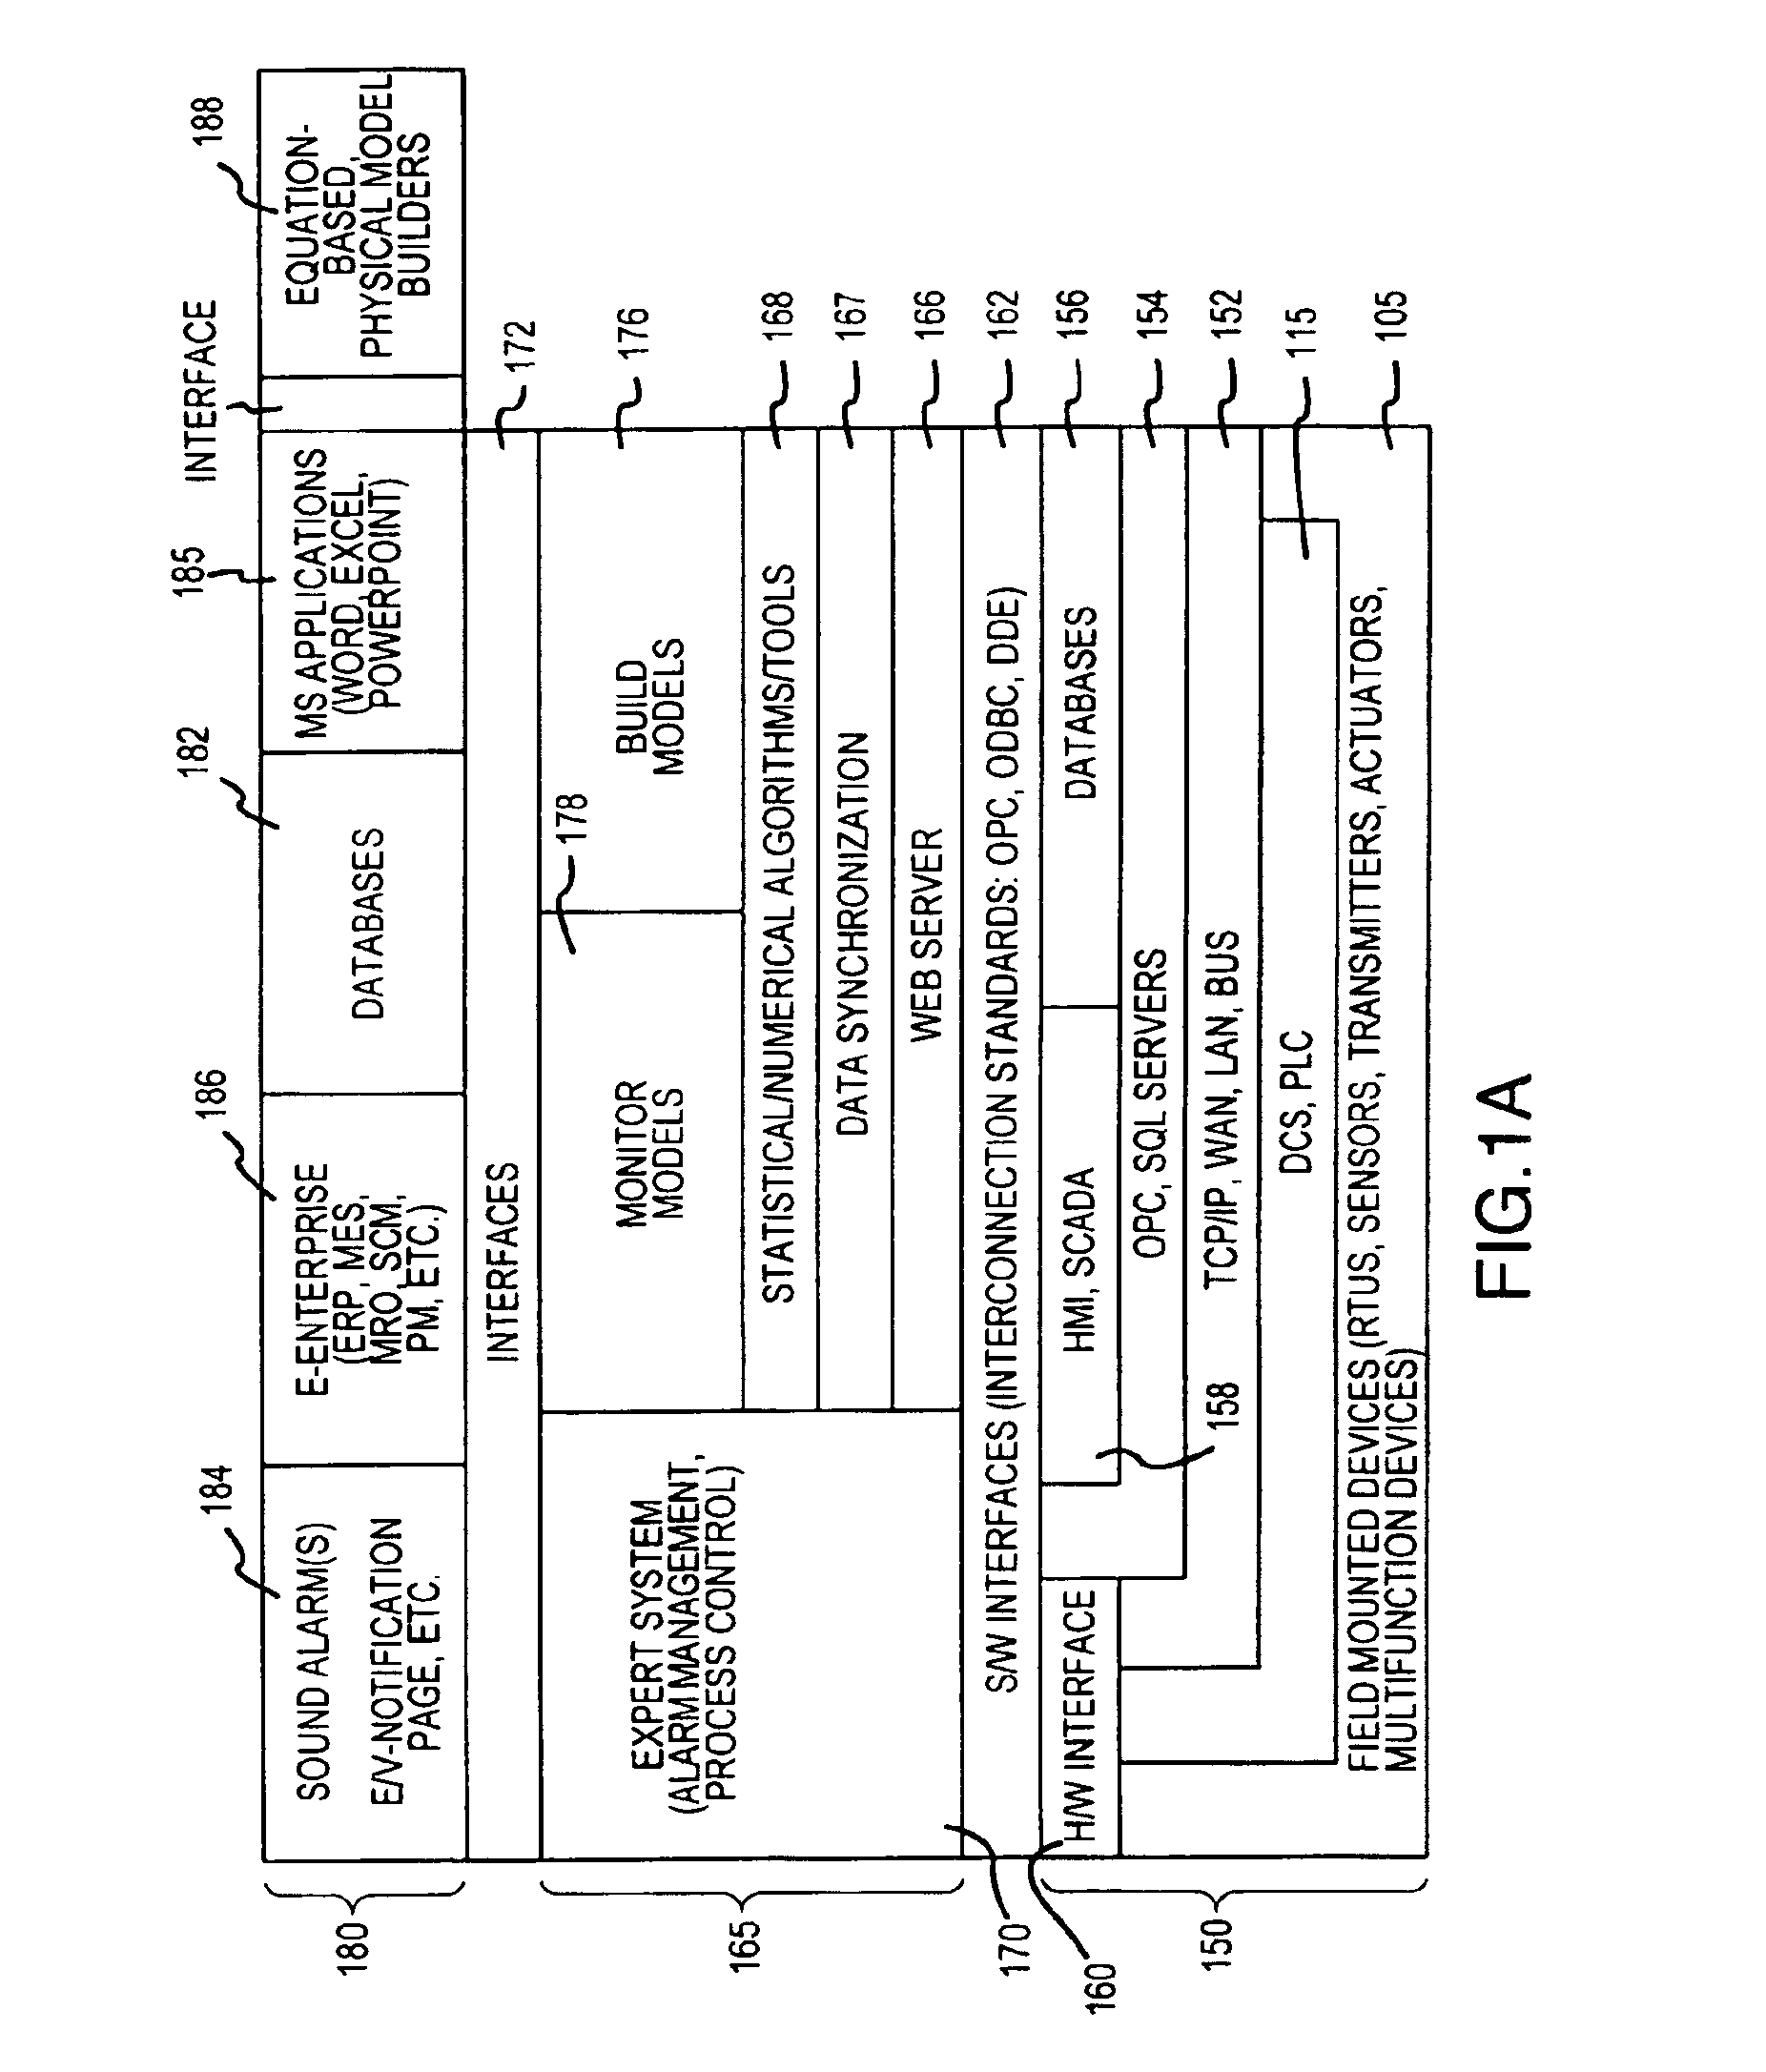 Control for an industrial process using one or more multidimensional variables